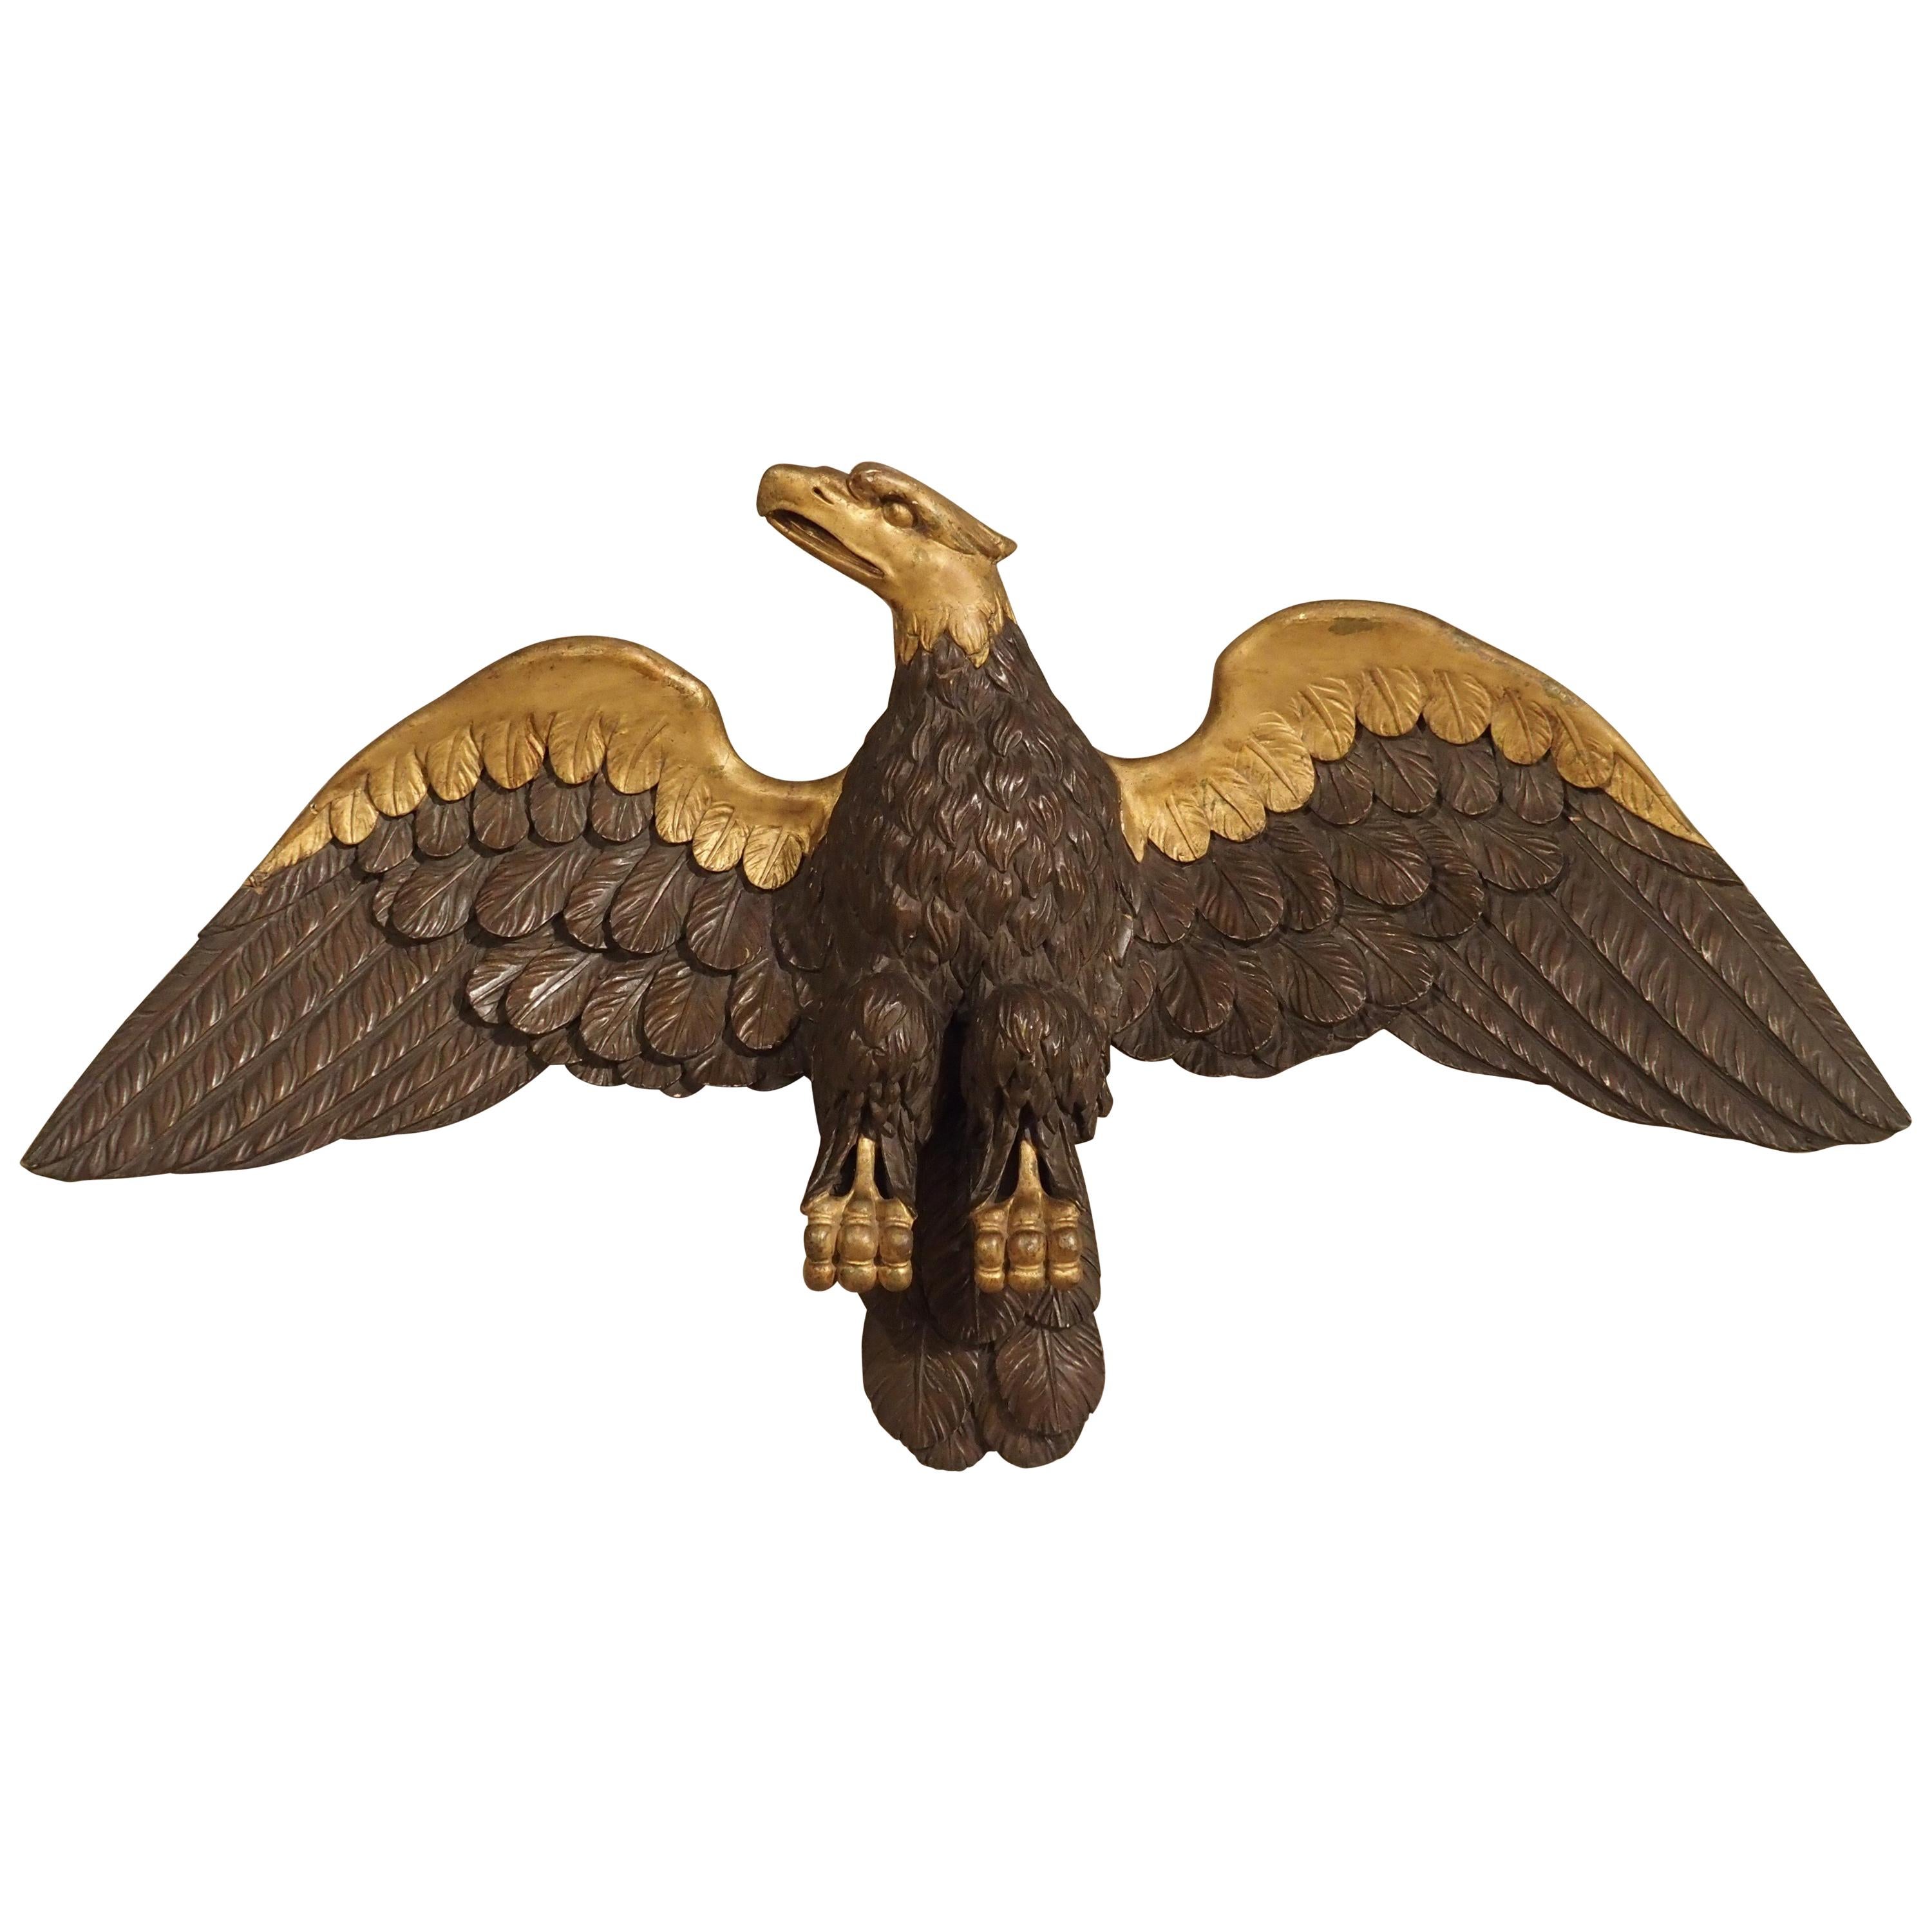 Large Antique Carved Wooden Eagle Sculpture, Late 18th Century